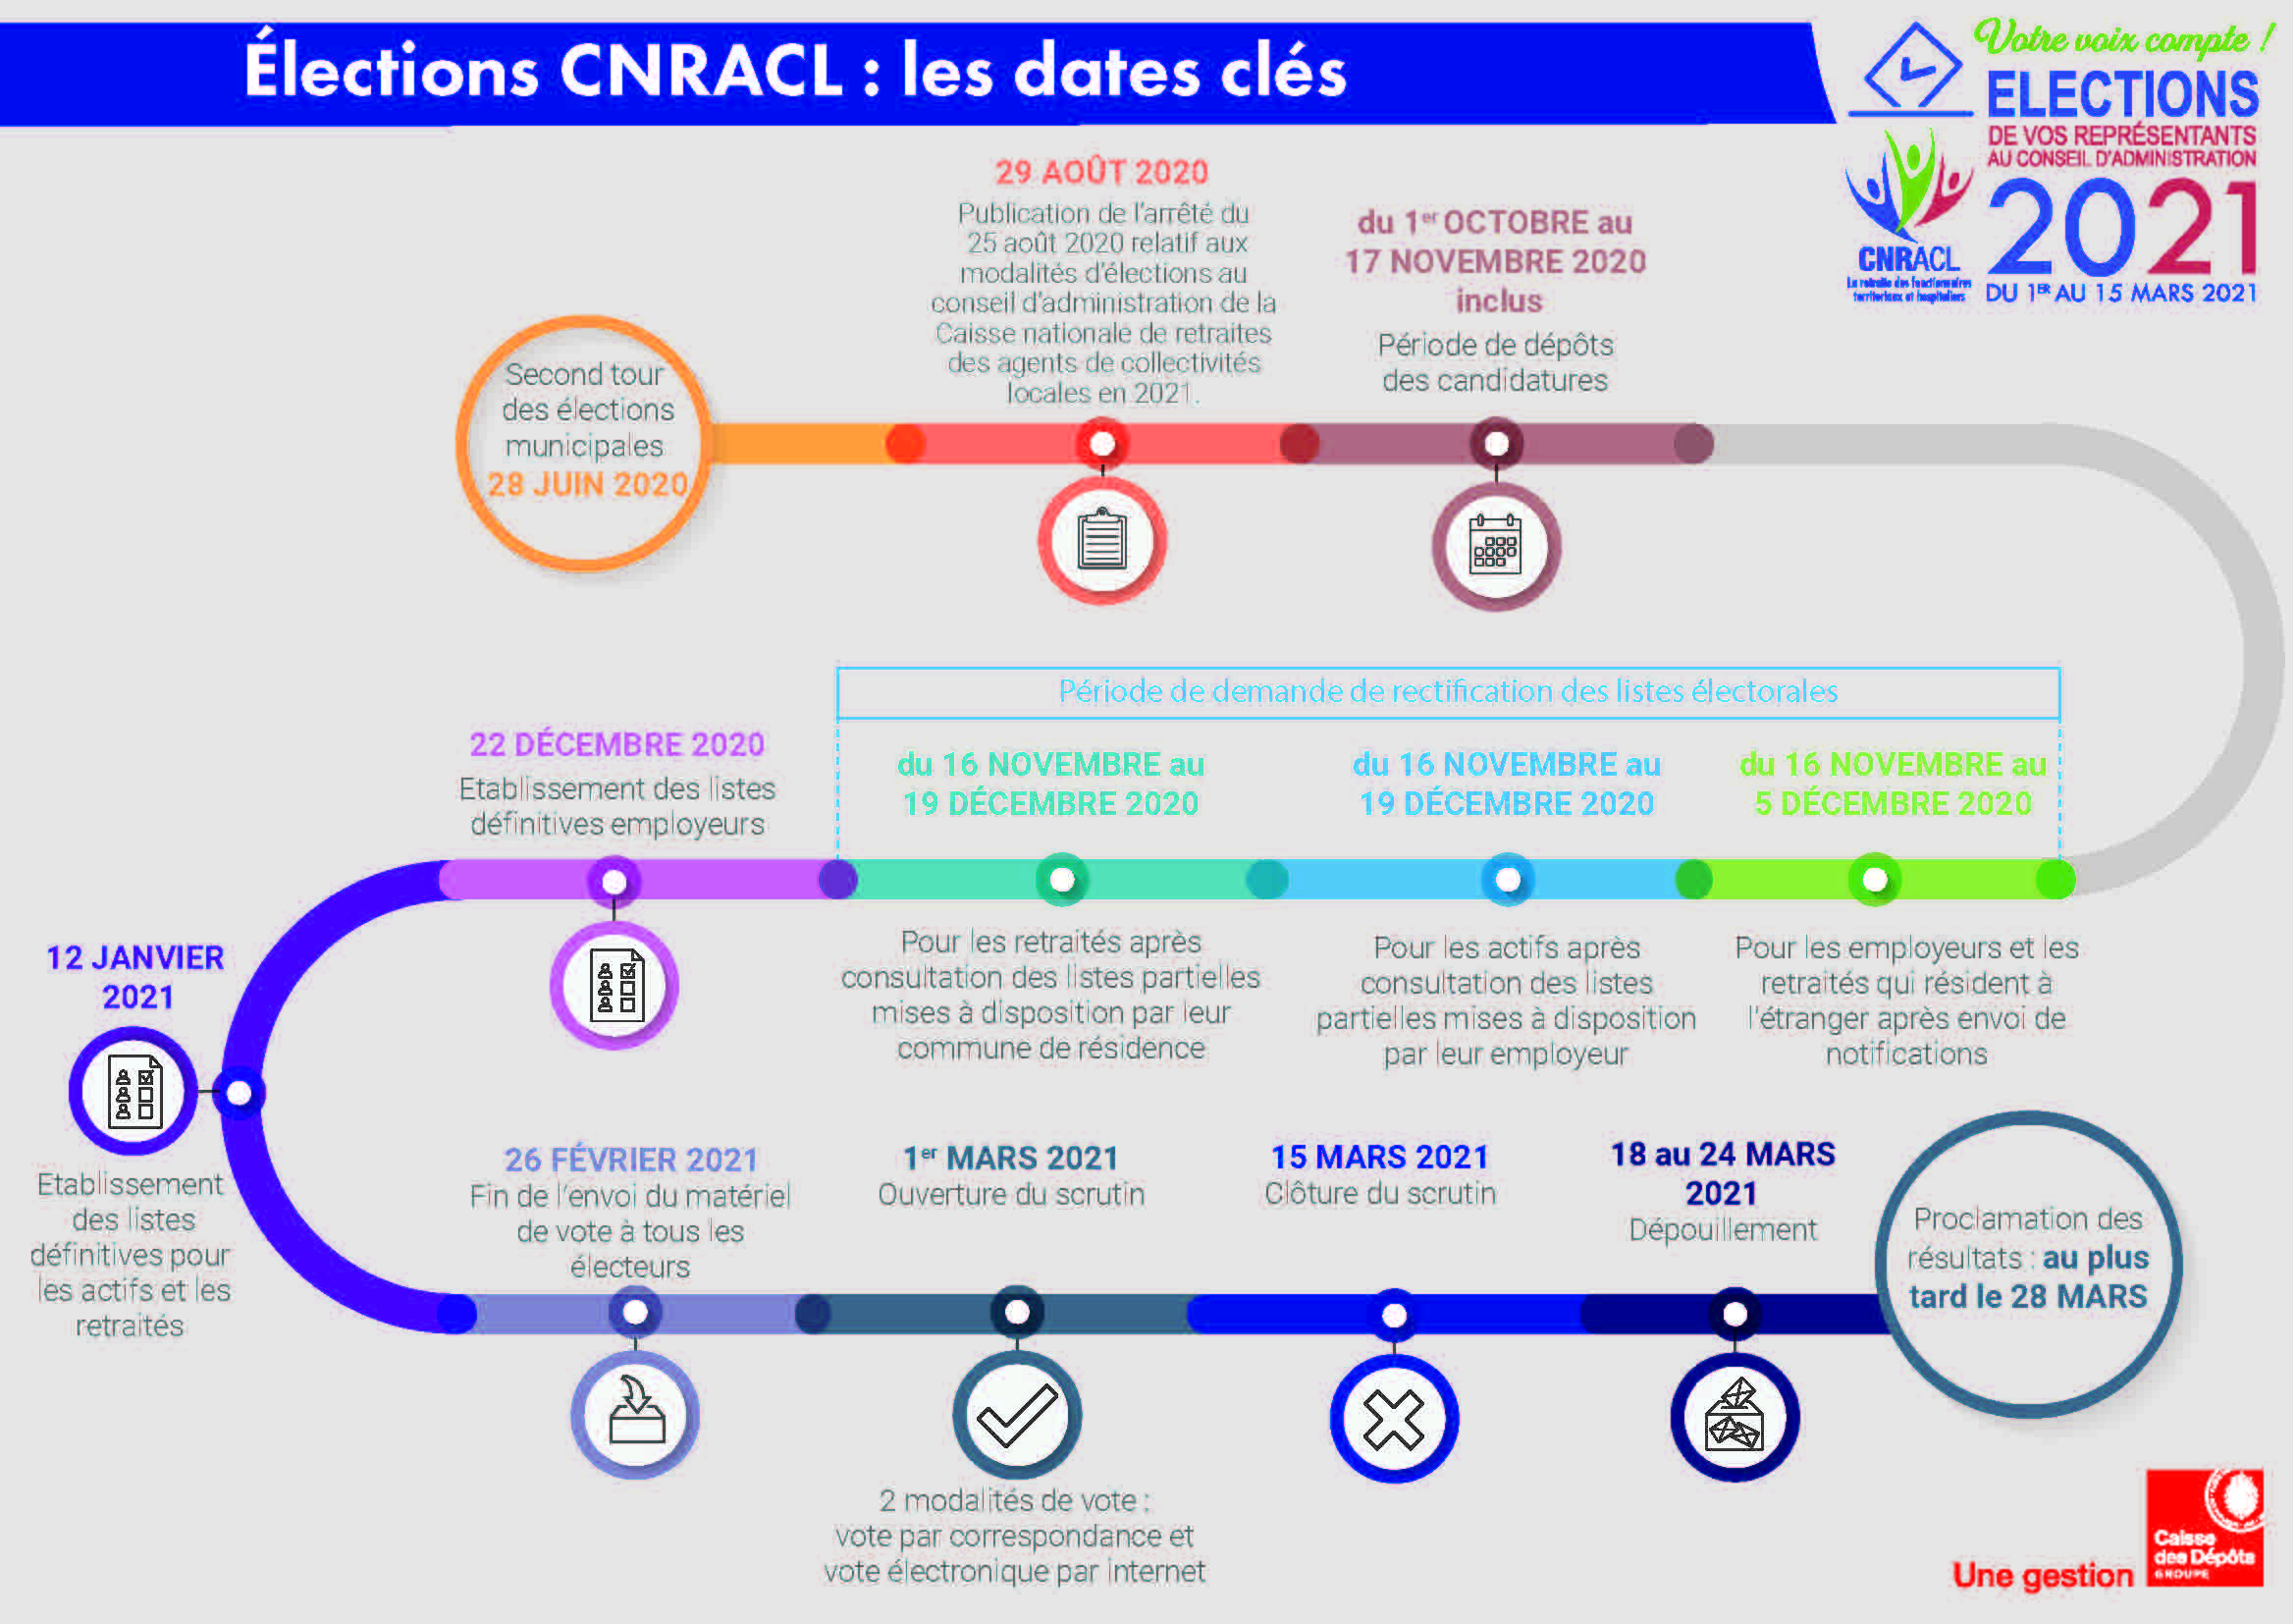 infographie_dates_cles-cnracl